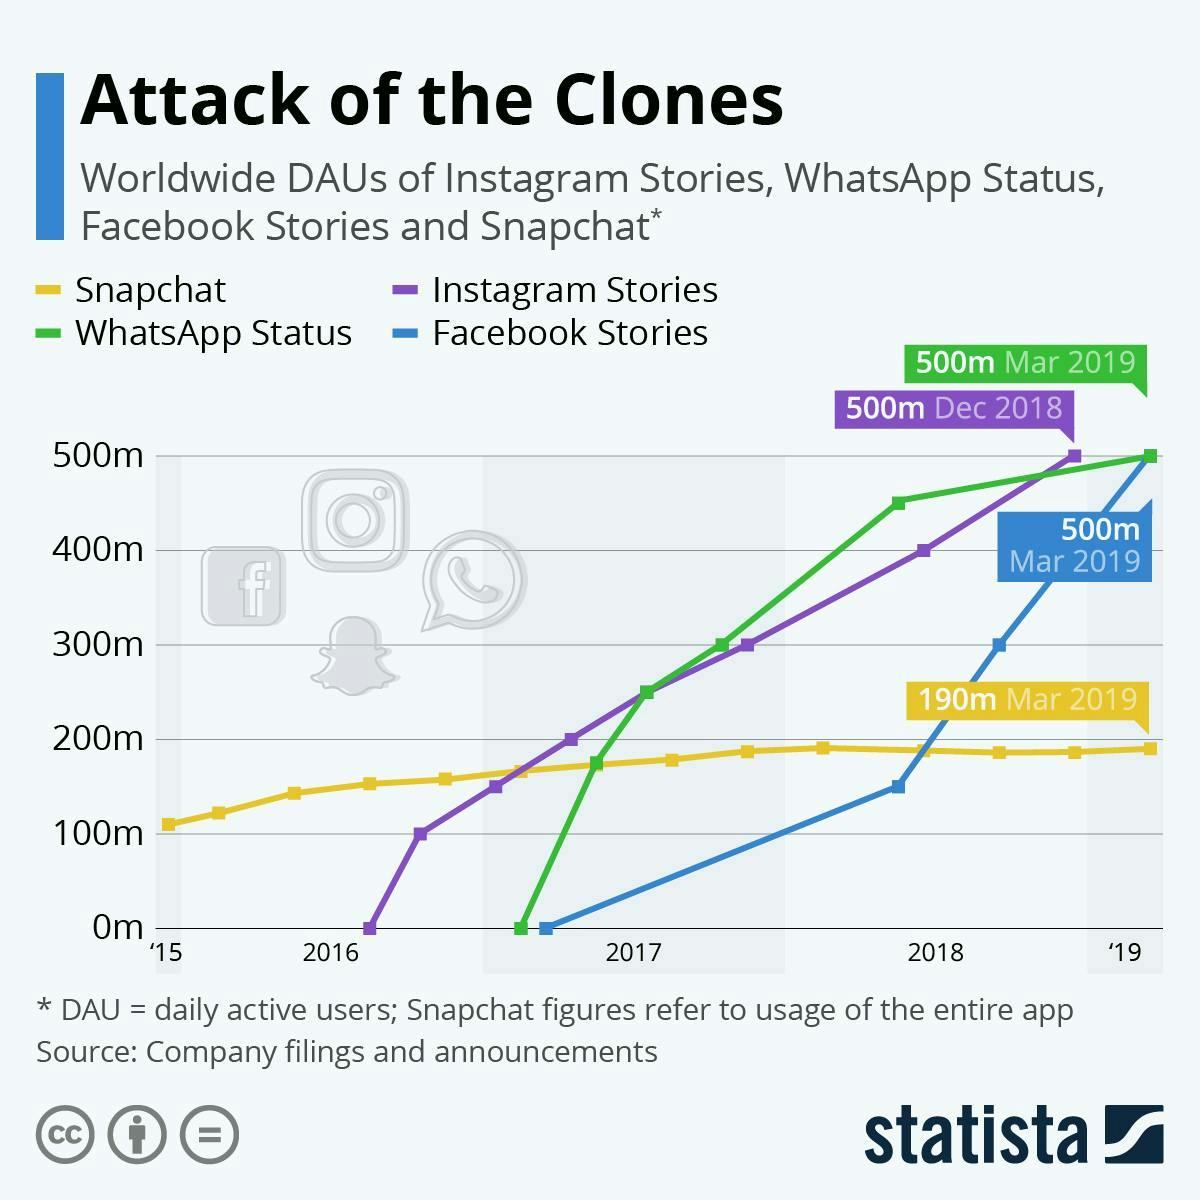 Worldwide Daily Active Users of Instagram Stories, Whatsapp Status, Facebook Stories and Snapchat from 2015 to 2019